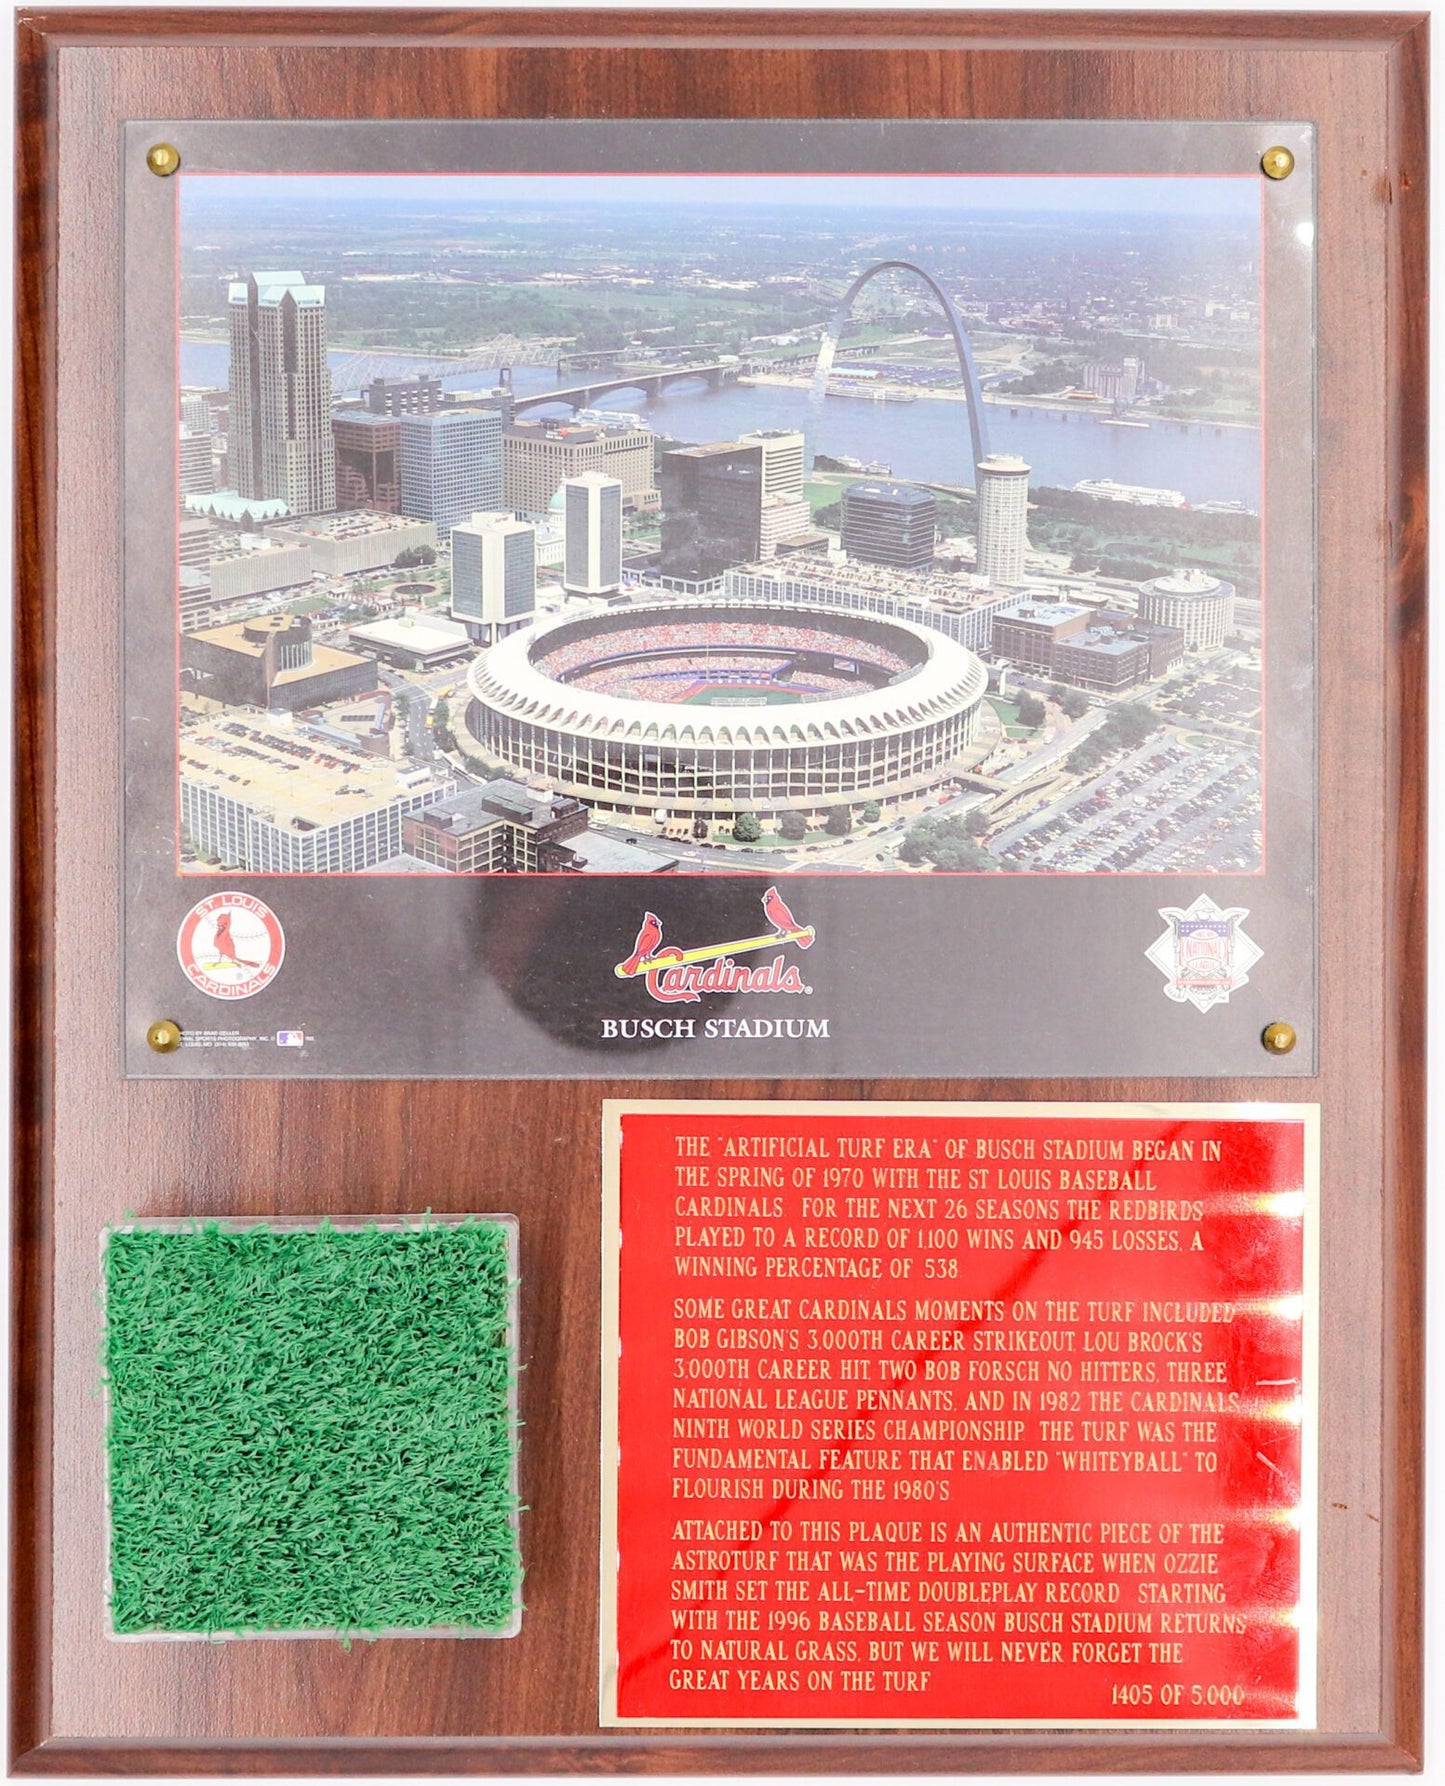 Mounted Tribute to St. Louis Busch Memorial Stadium, Home of the Cardinals